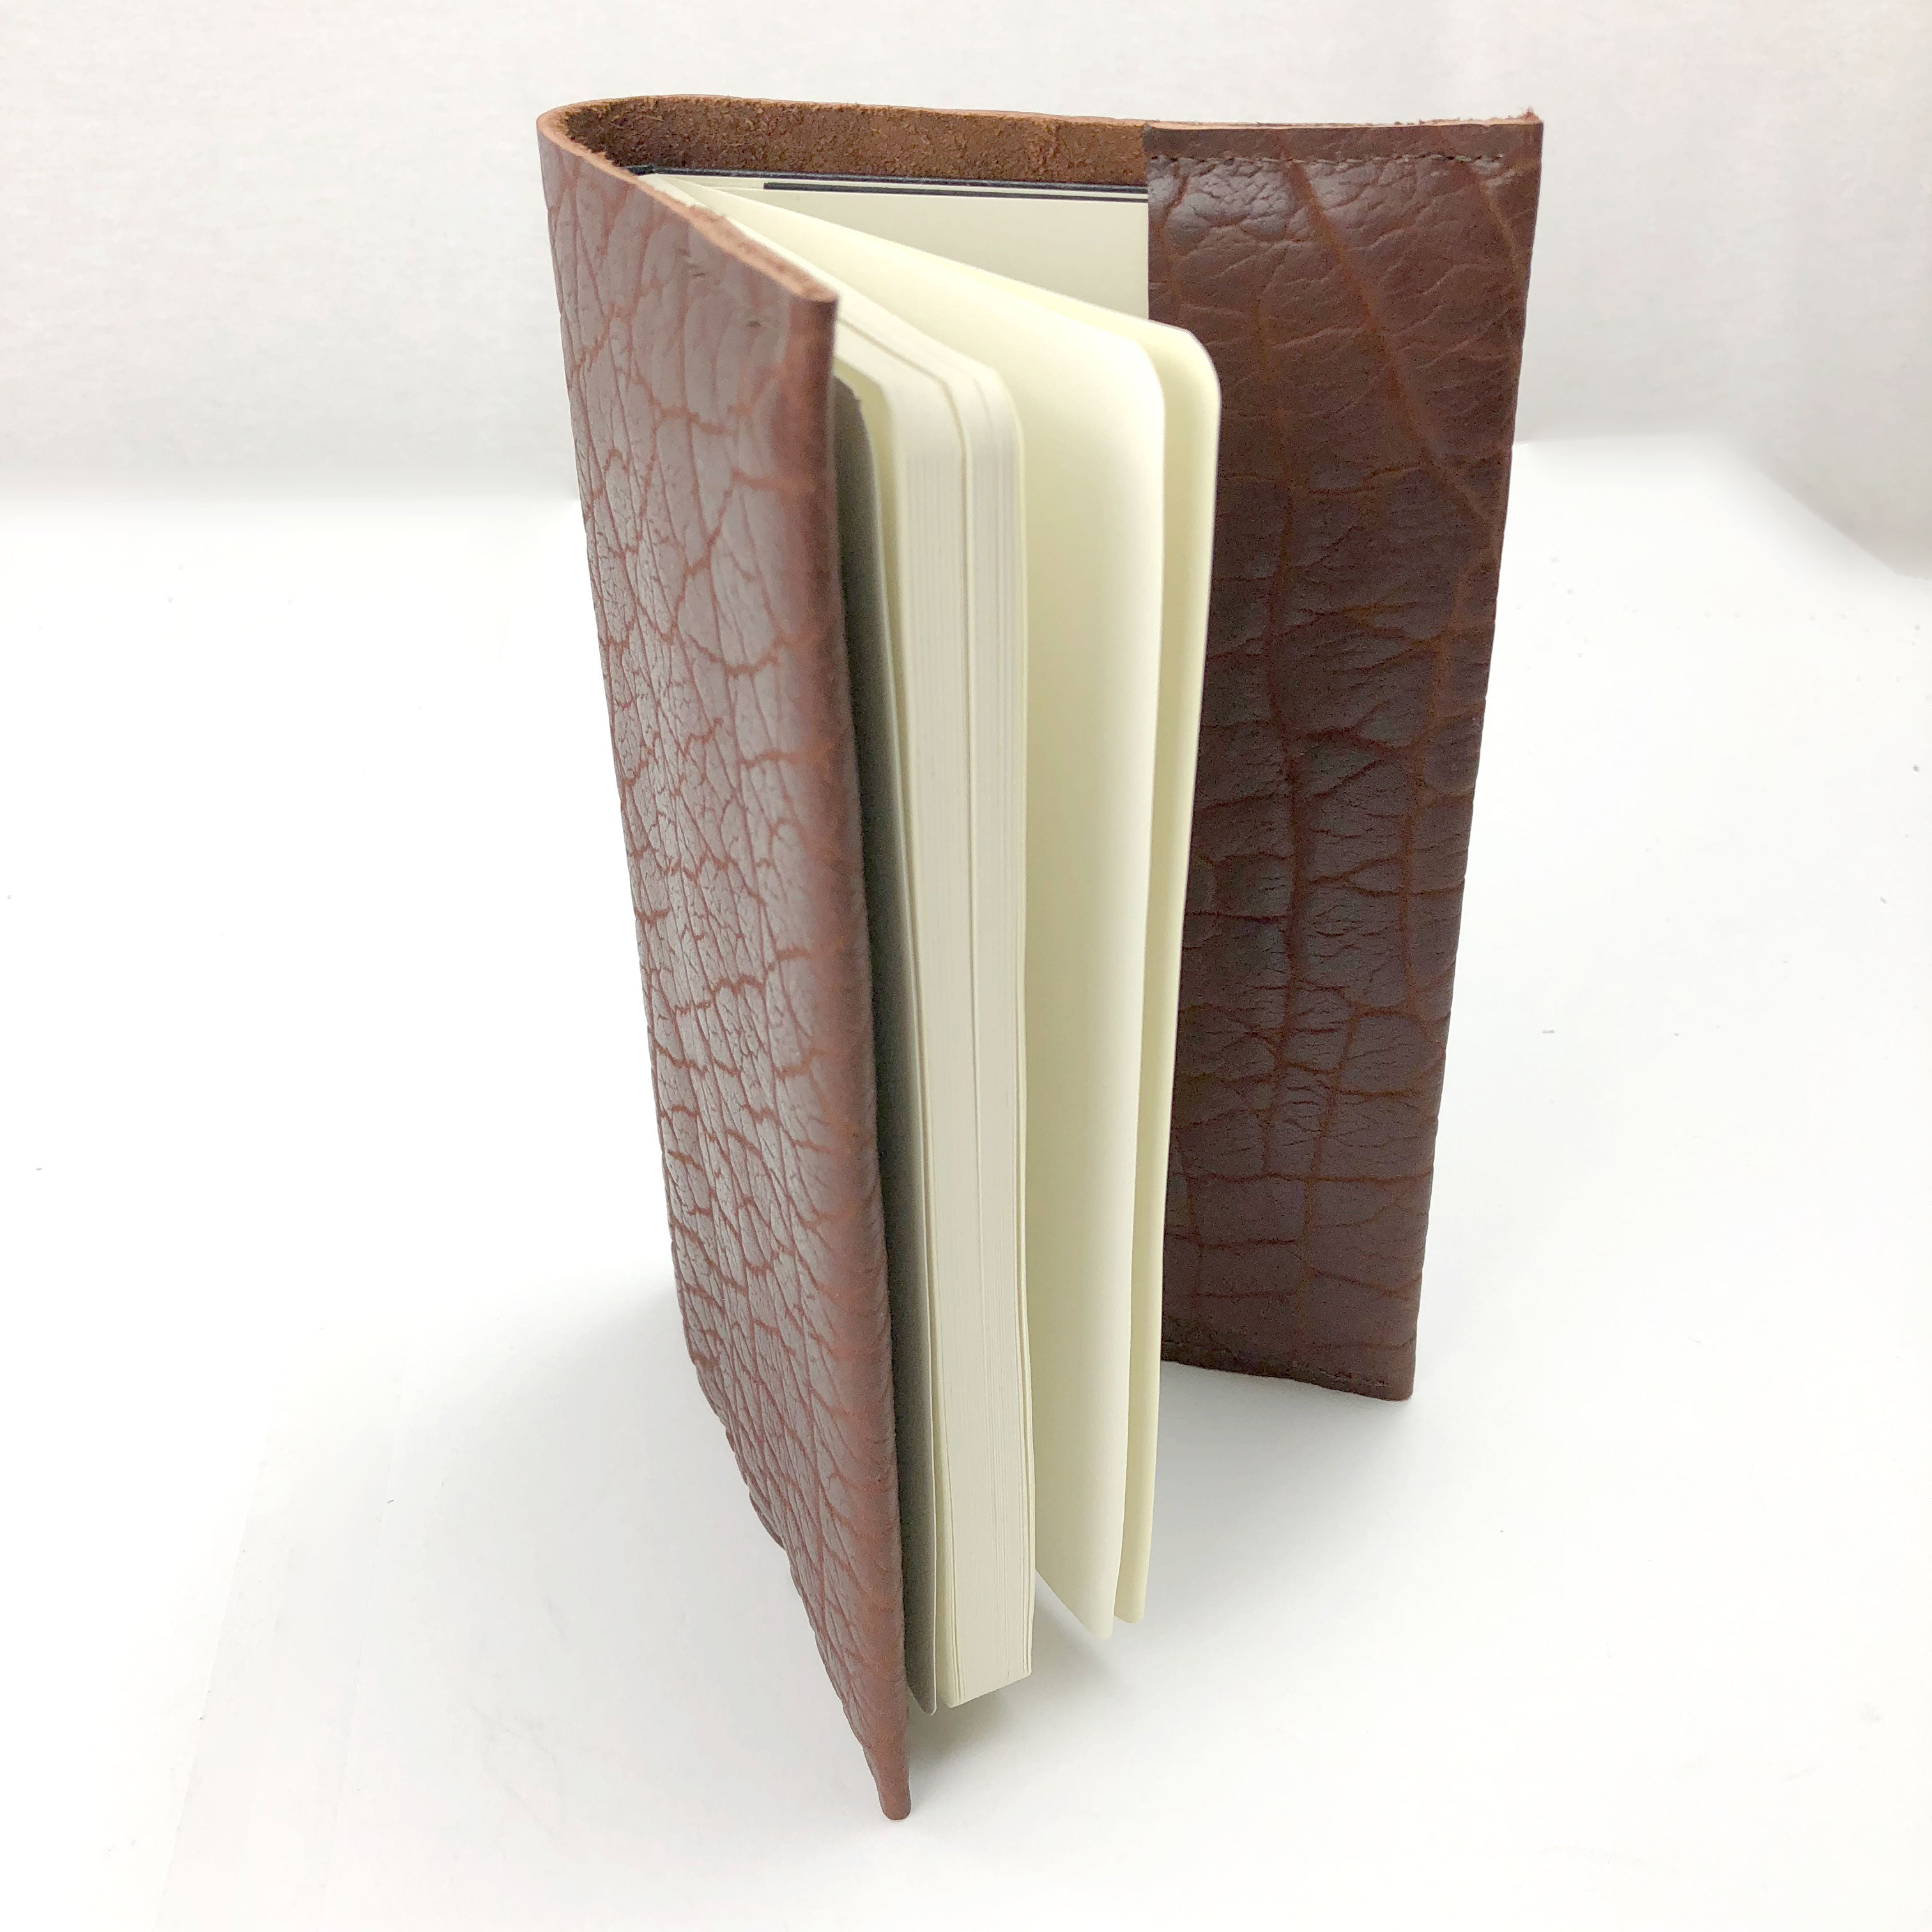 Moleskine Book Cover Upright with Pages